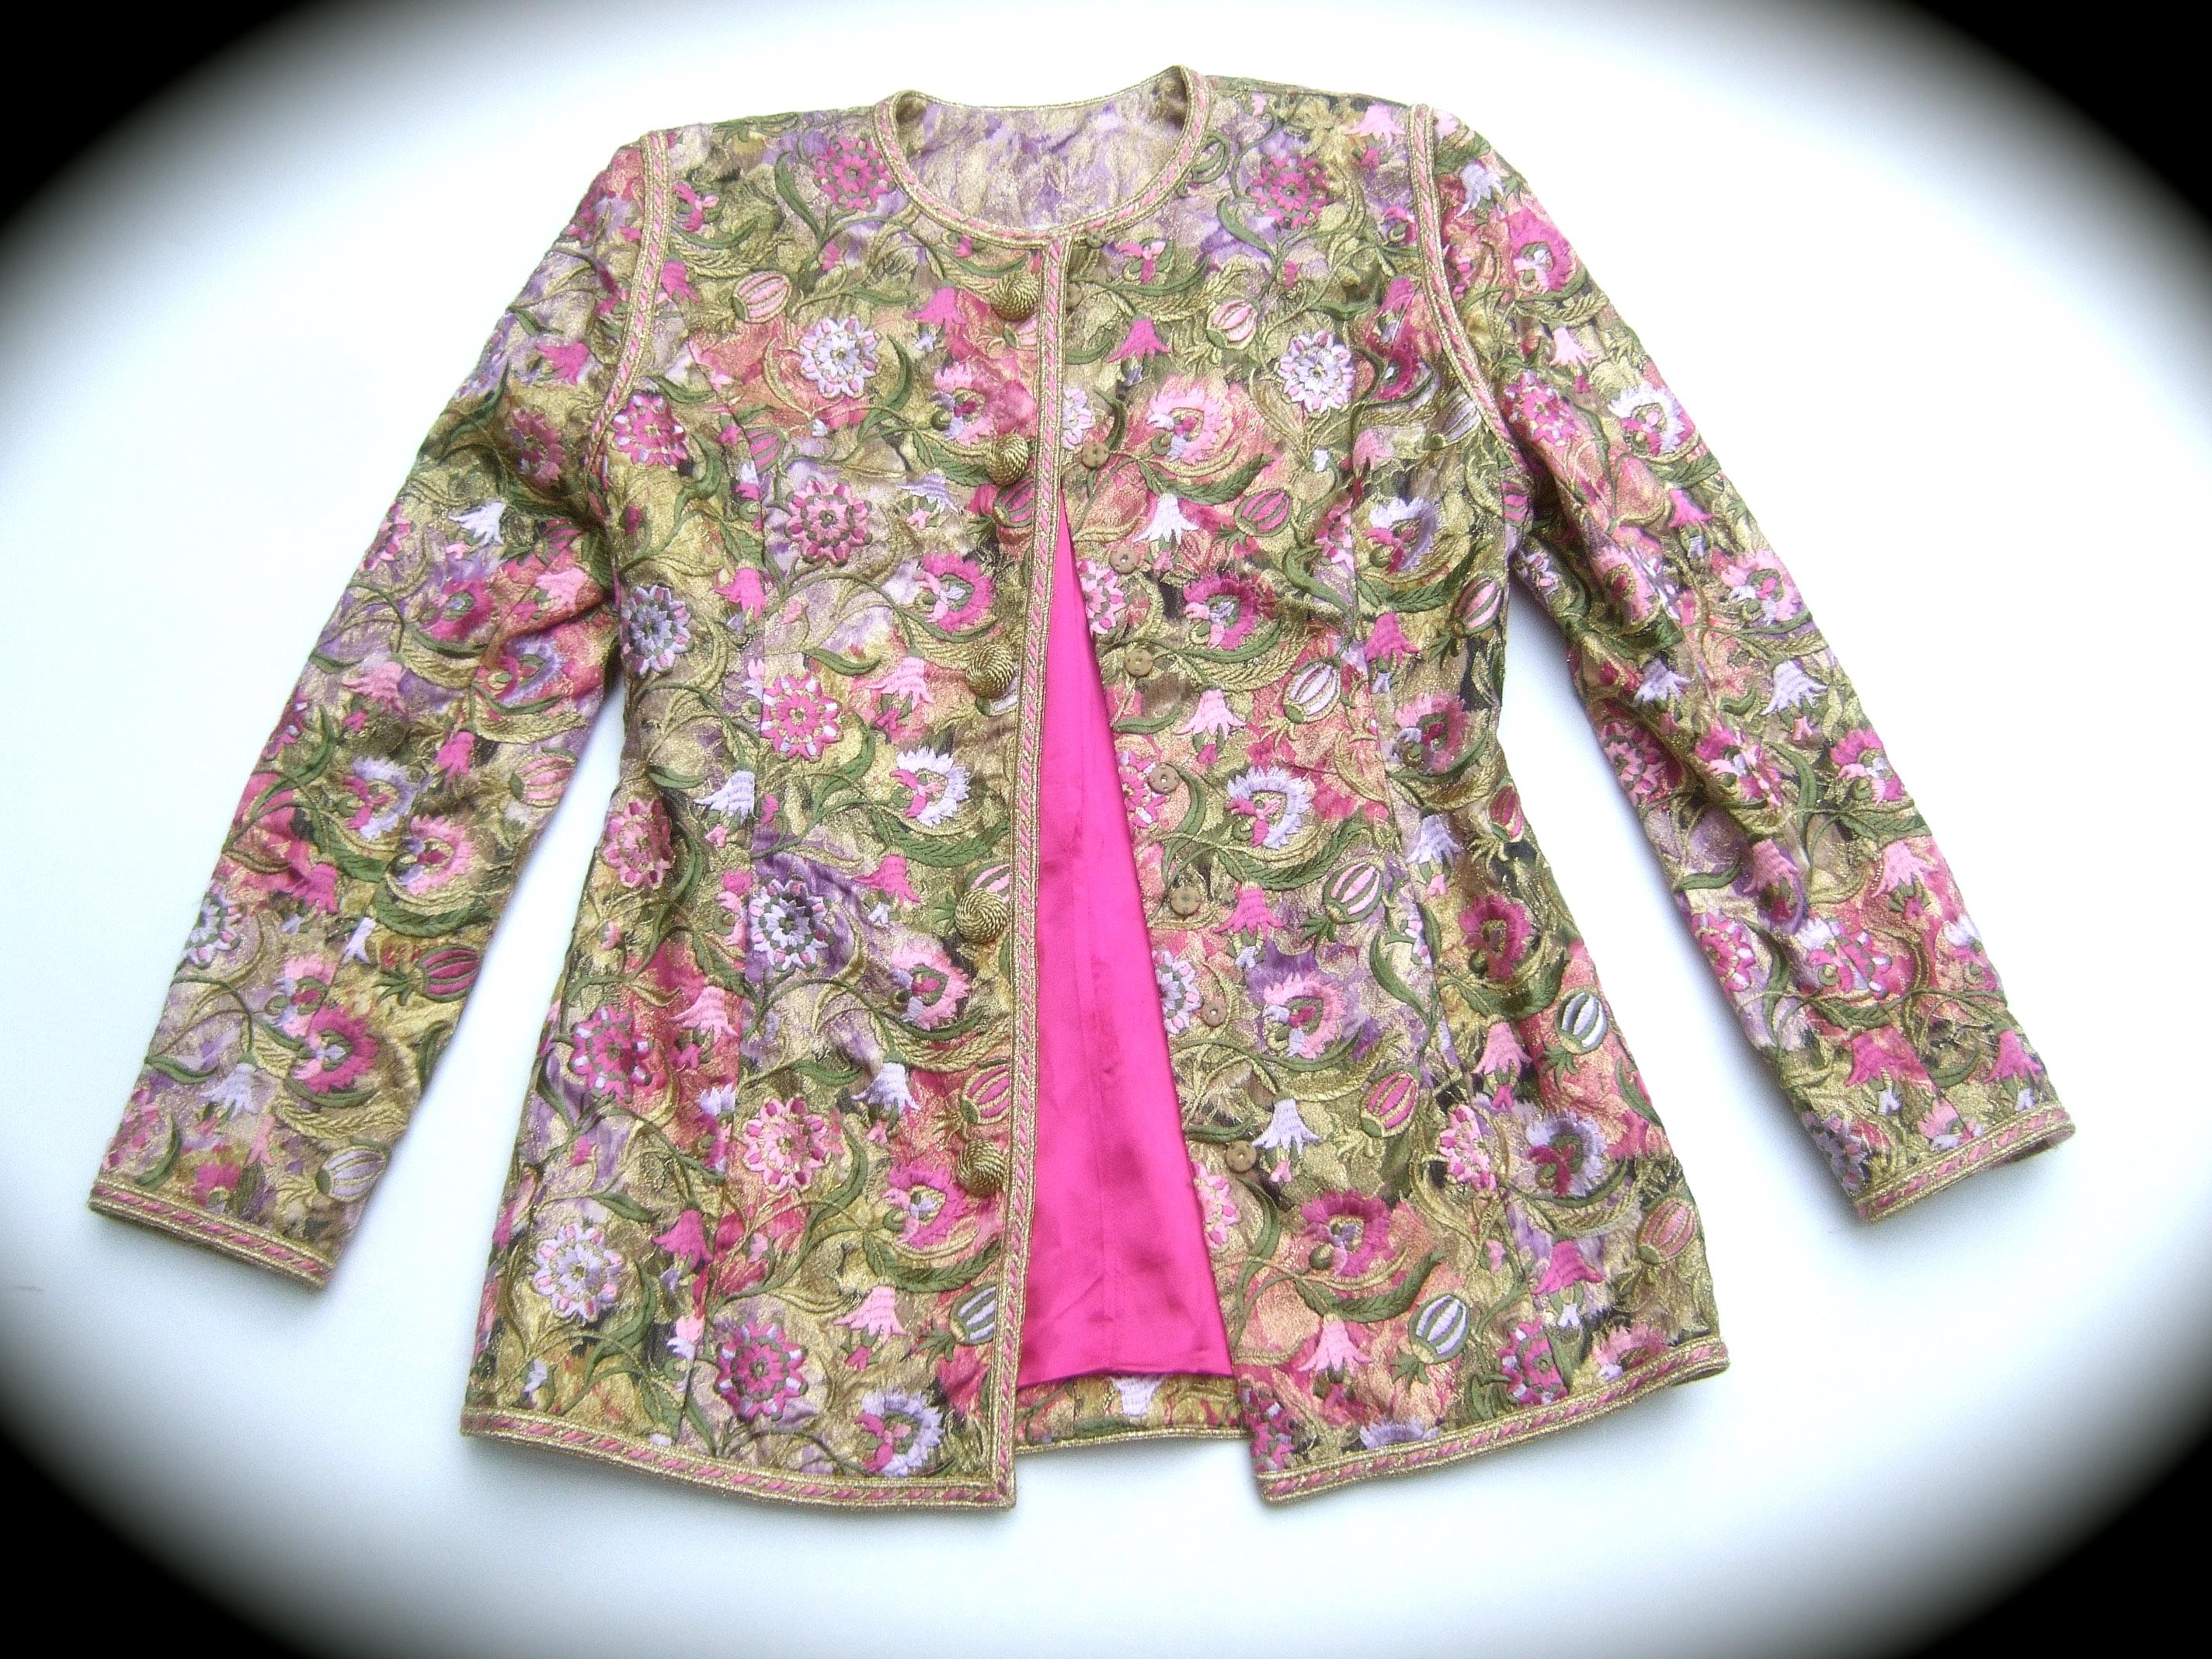 Brown Saks Fifth Avenue Pastel Floral Embroidered Jacket by Victor Costa c 1980s